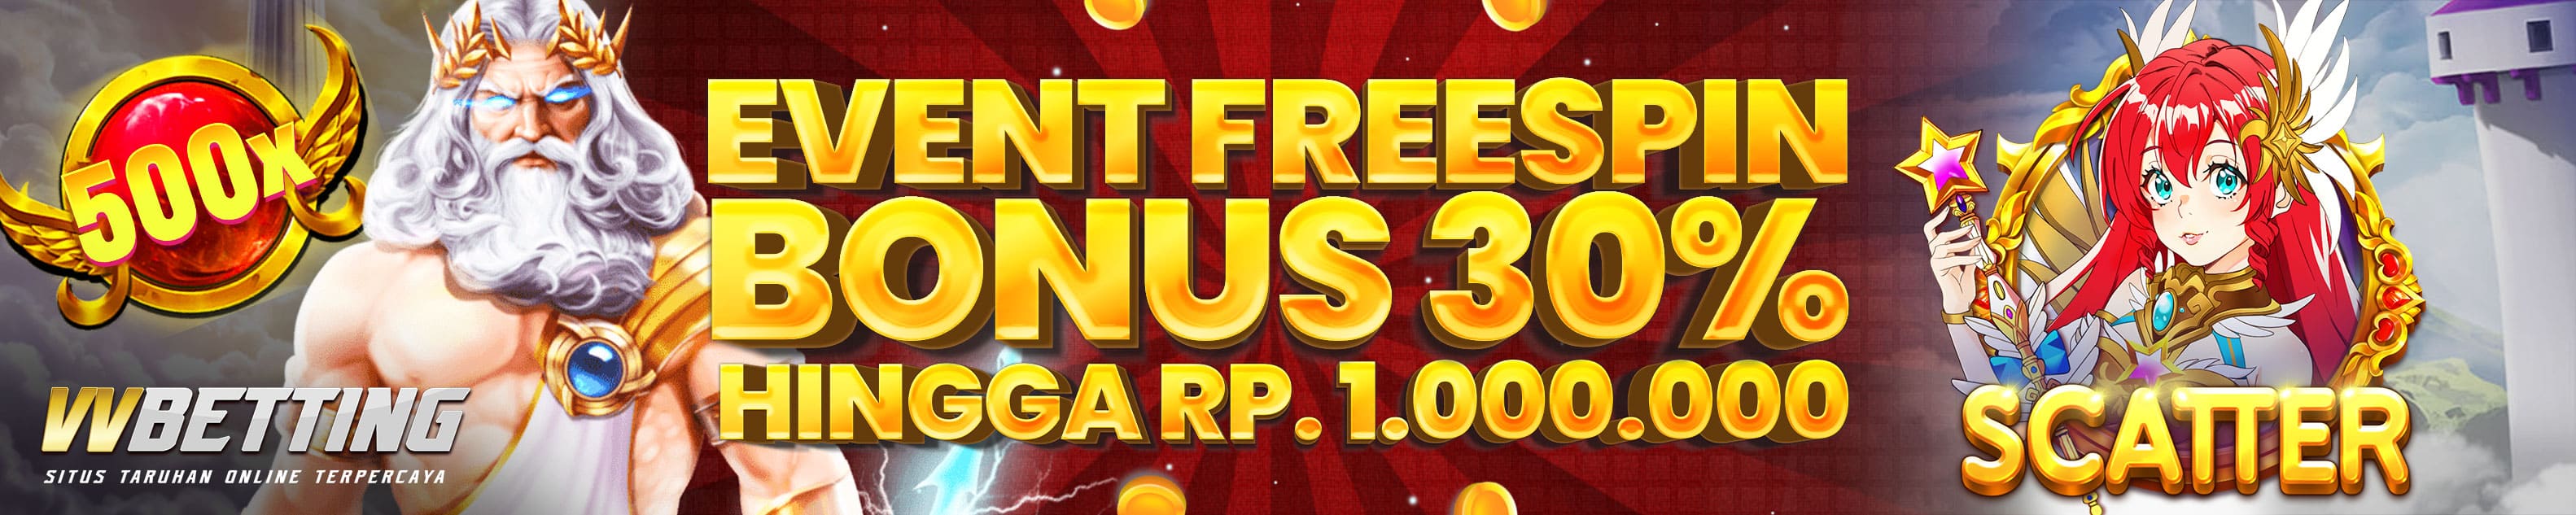 Event FreeSpin VVBETTING